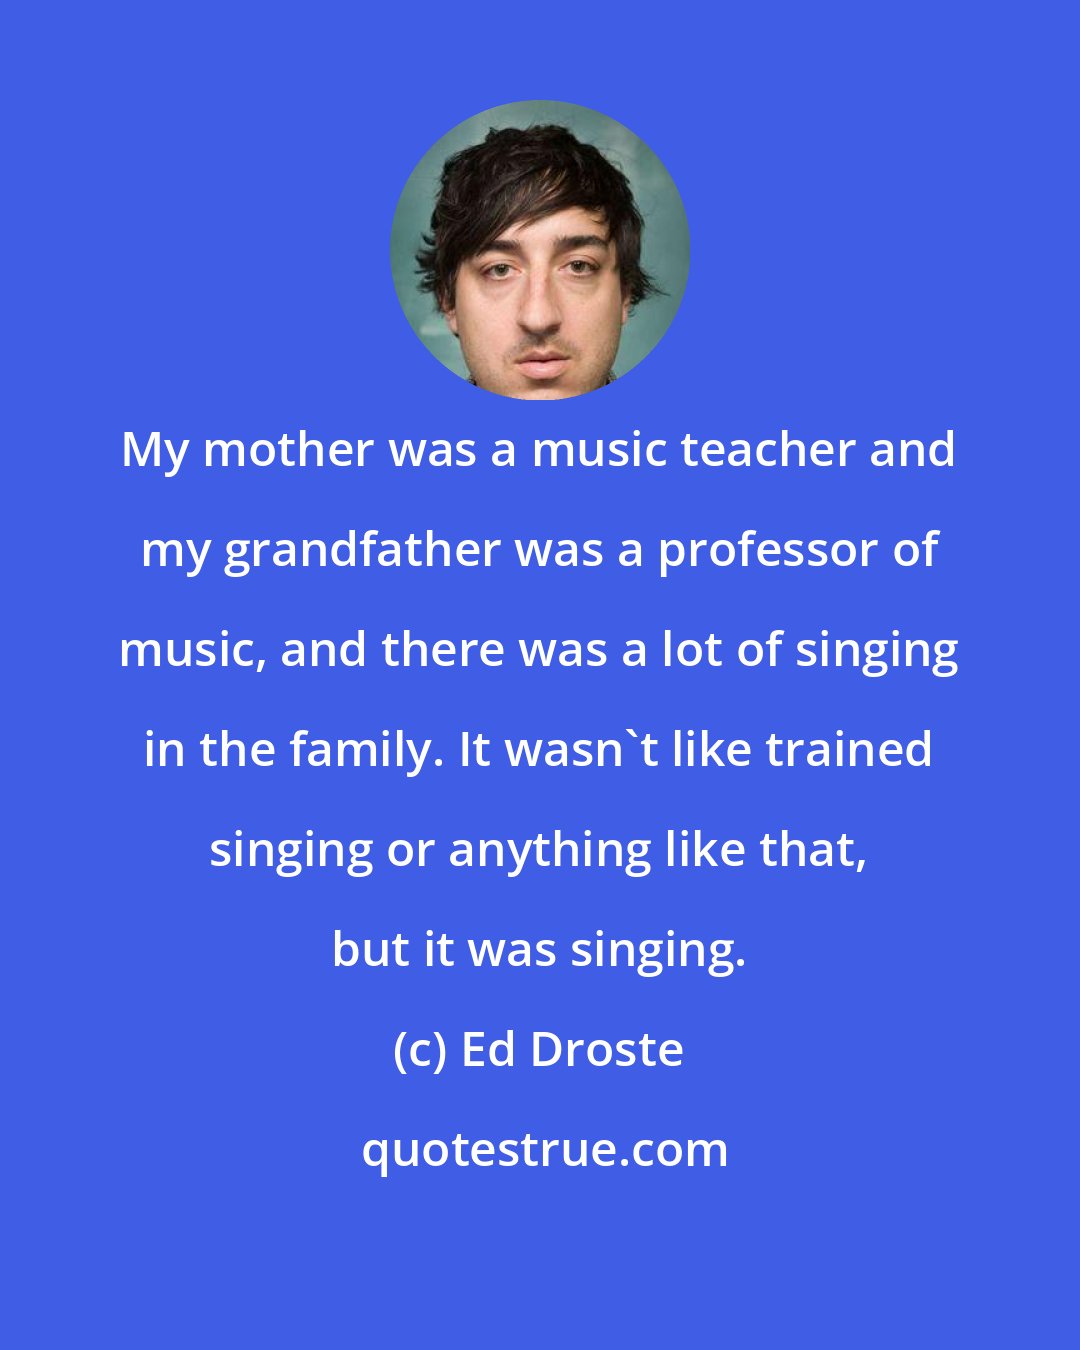 Ed Droste: My mother was a music teacher and my grandfather was a professor of music, and there was a lot of singing in the family. It wasn't like trained singing or anything like that, but it was singing.